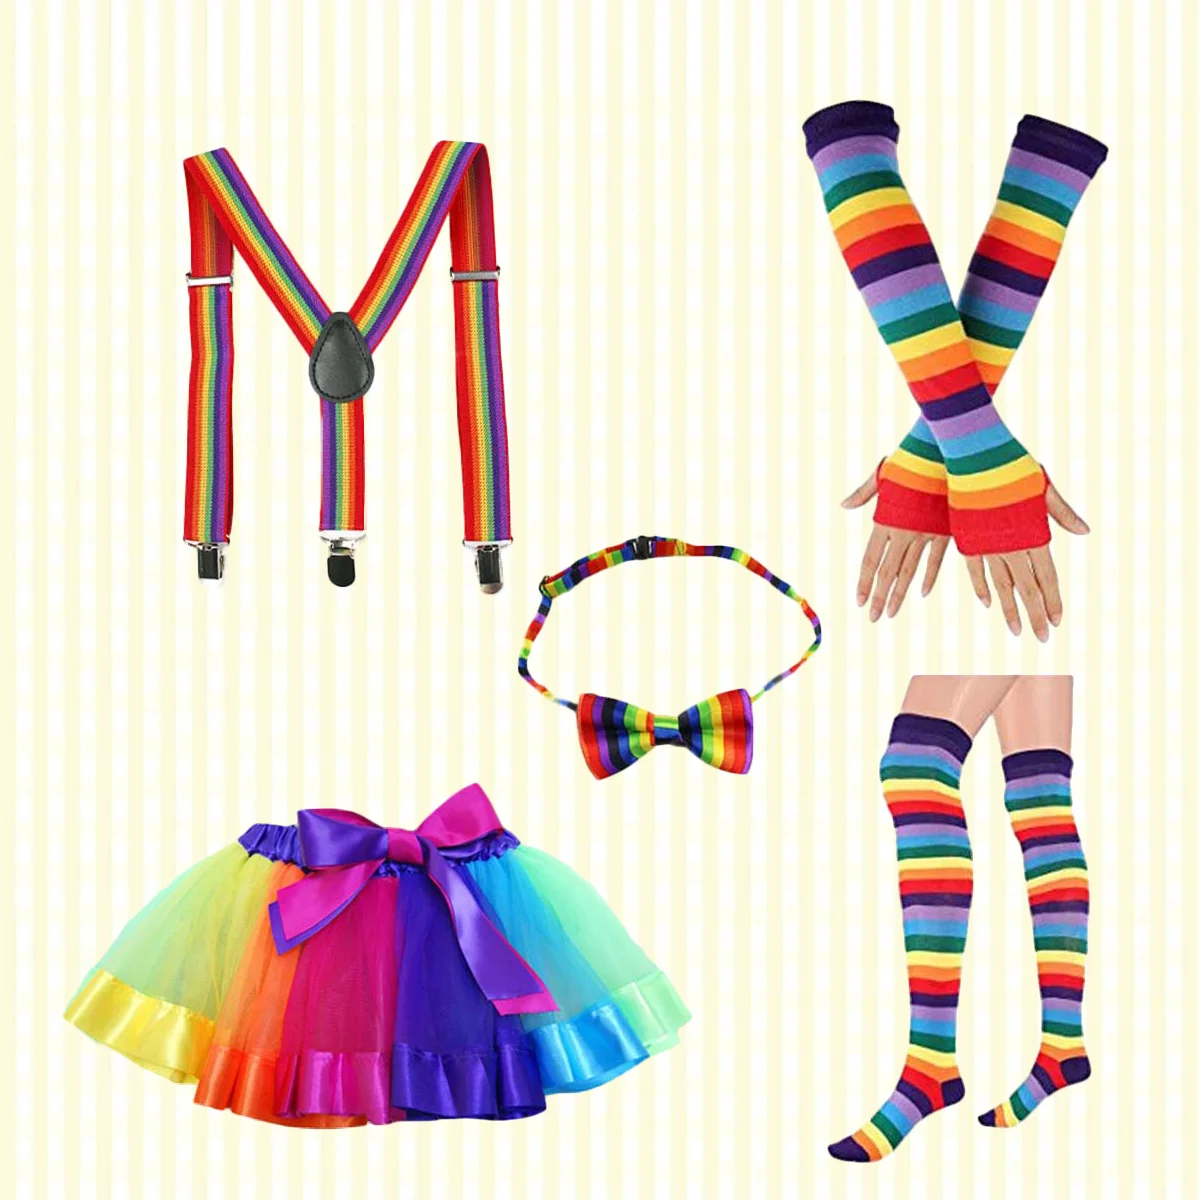 

Rainbow Tutu Skirt Kit Colorful Bowknot Tie Long Gloves Stocking Suspenders Costumes Accessory Set for Adult(Style B)